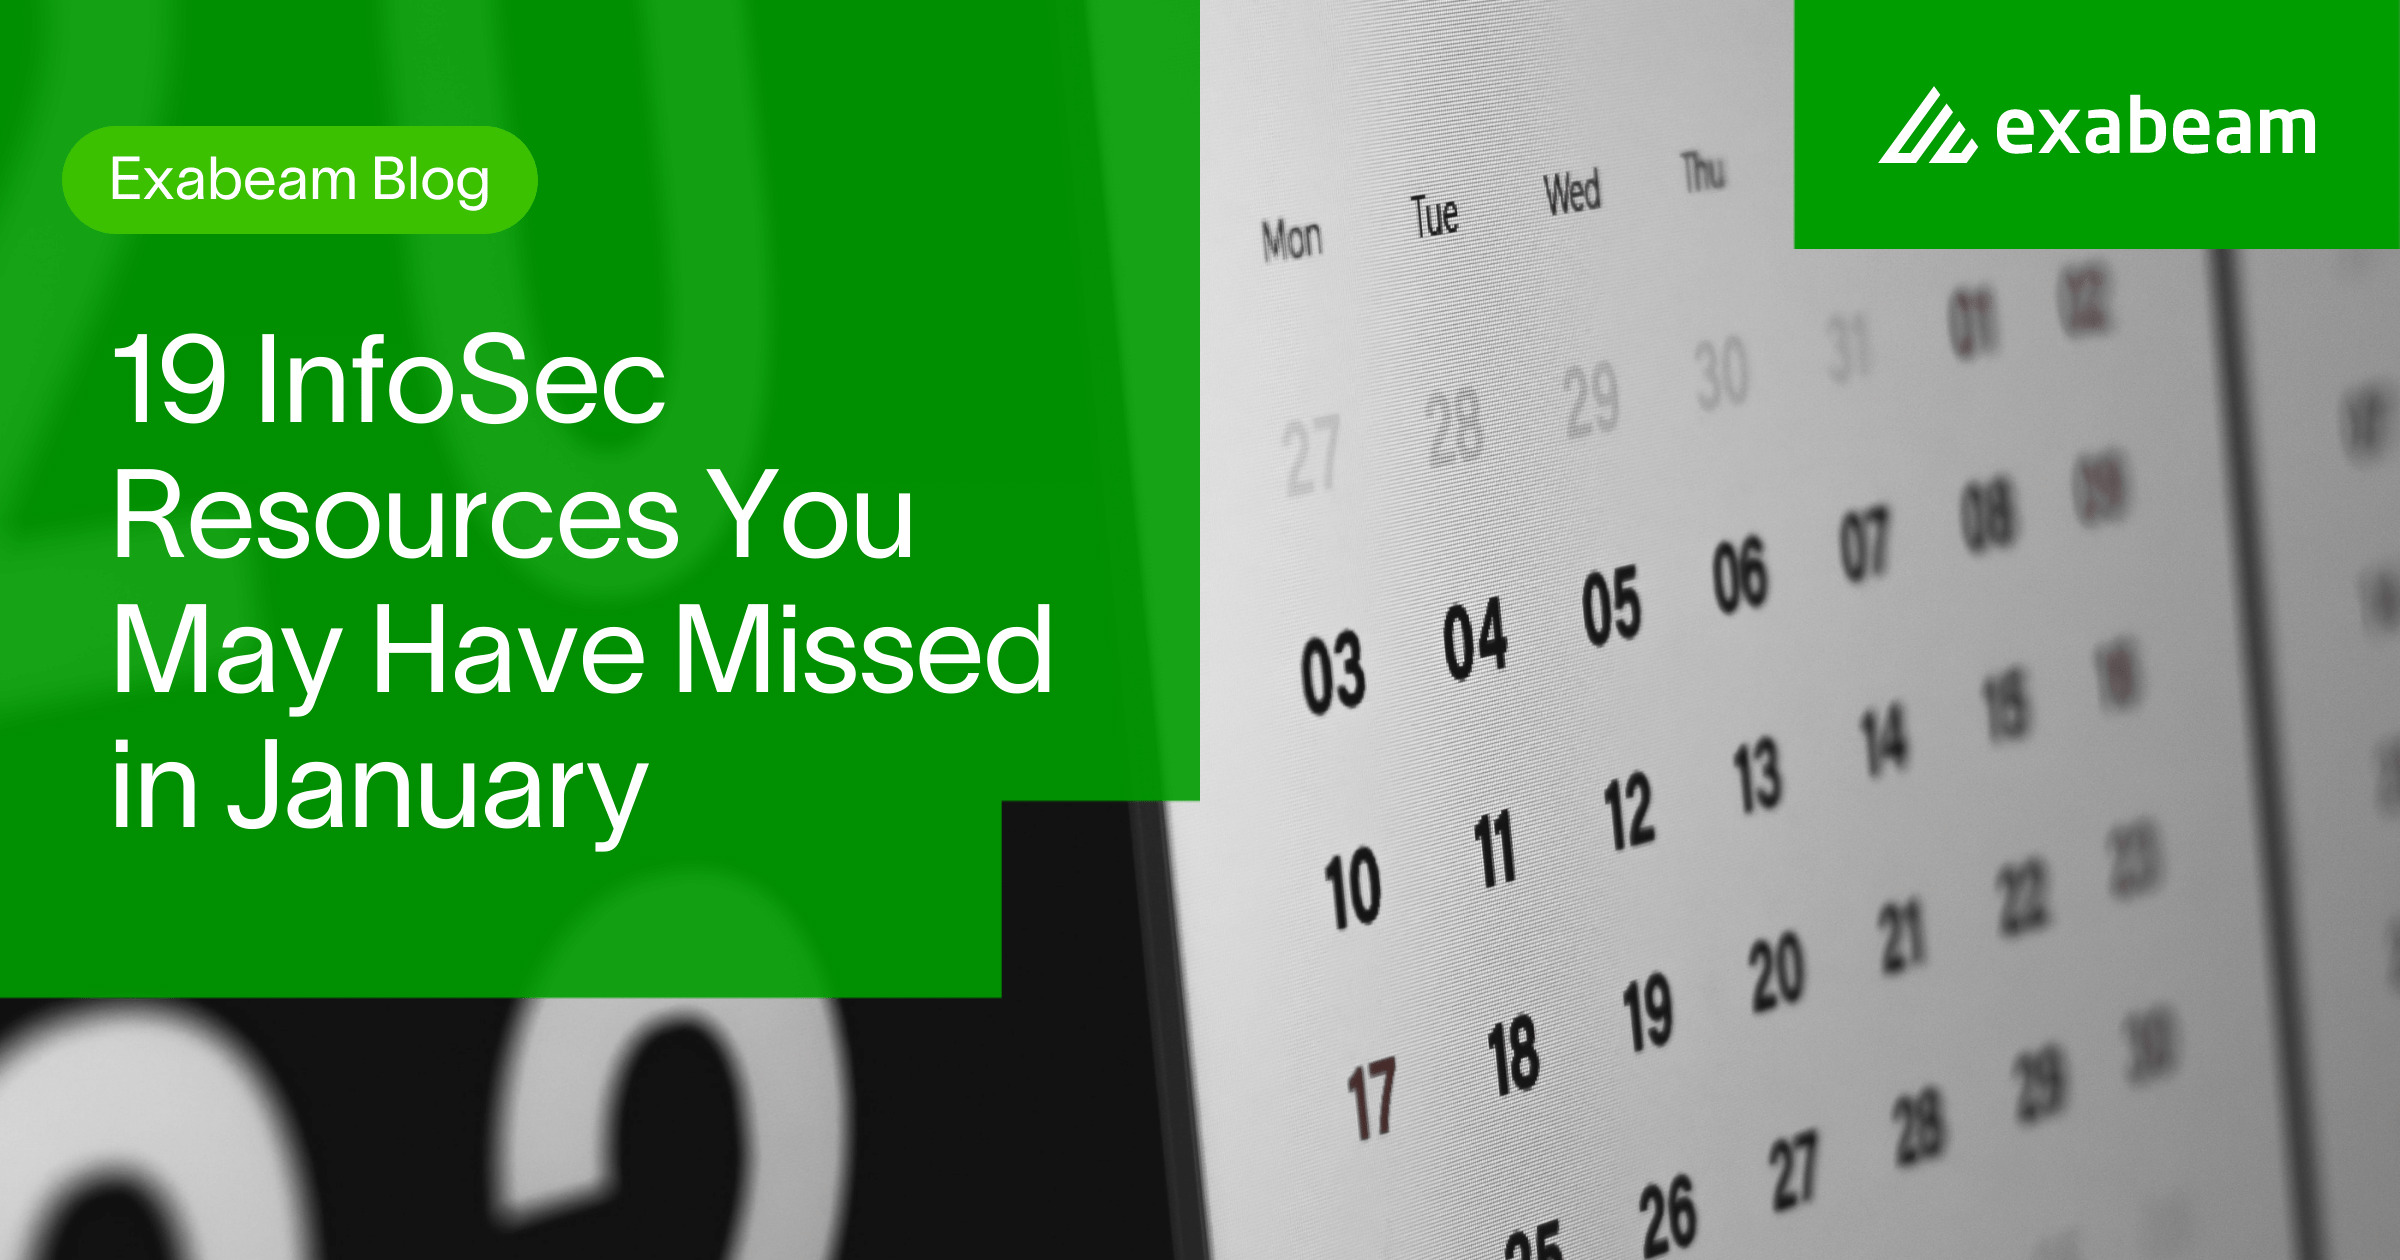 19 InfoSec Resources You May Have Missed in January